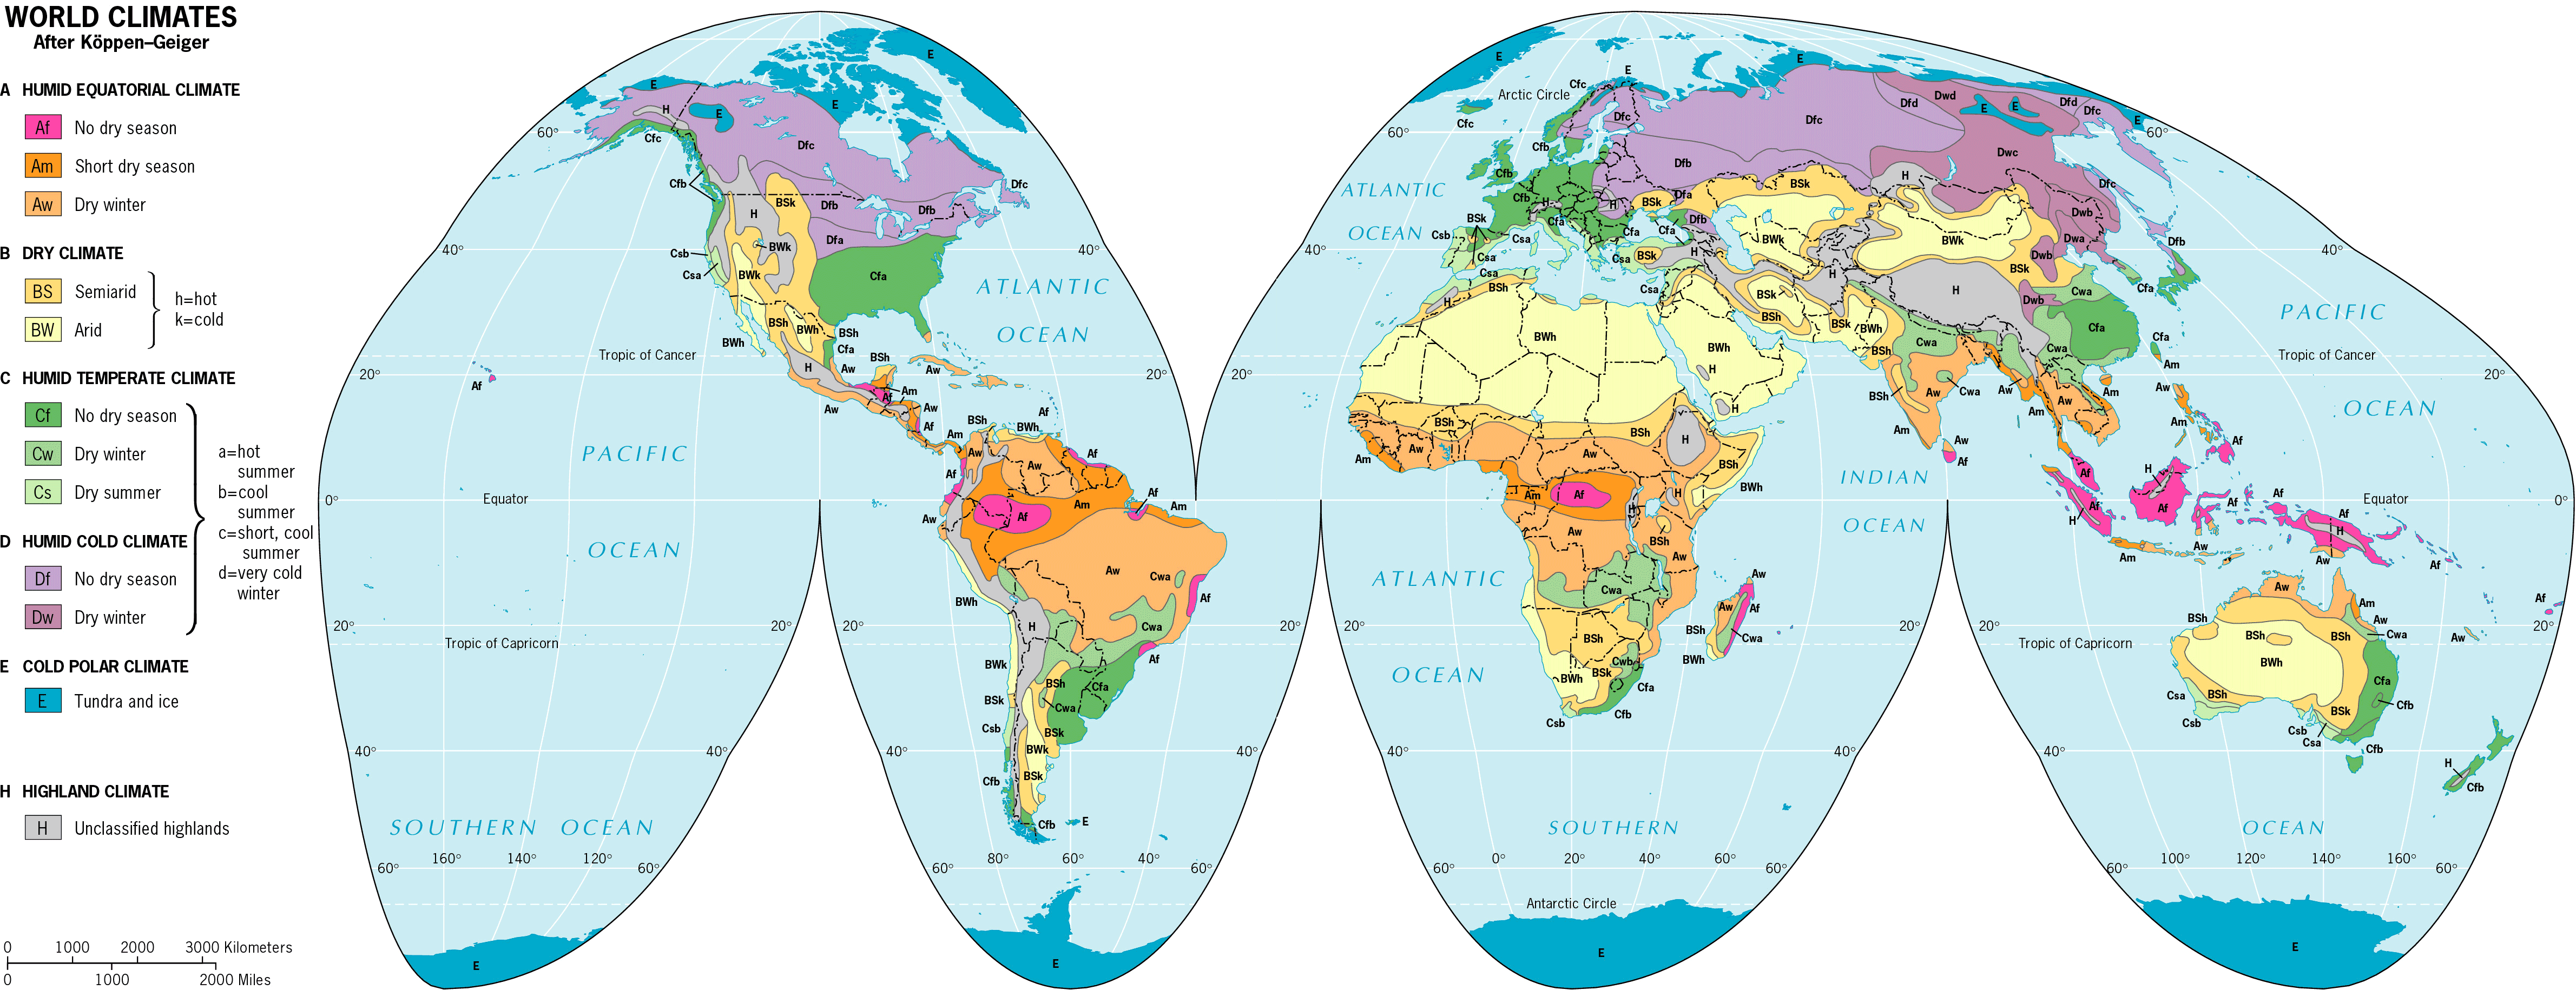 Climatological map of the world